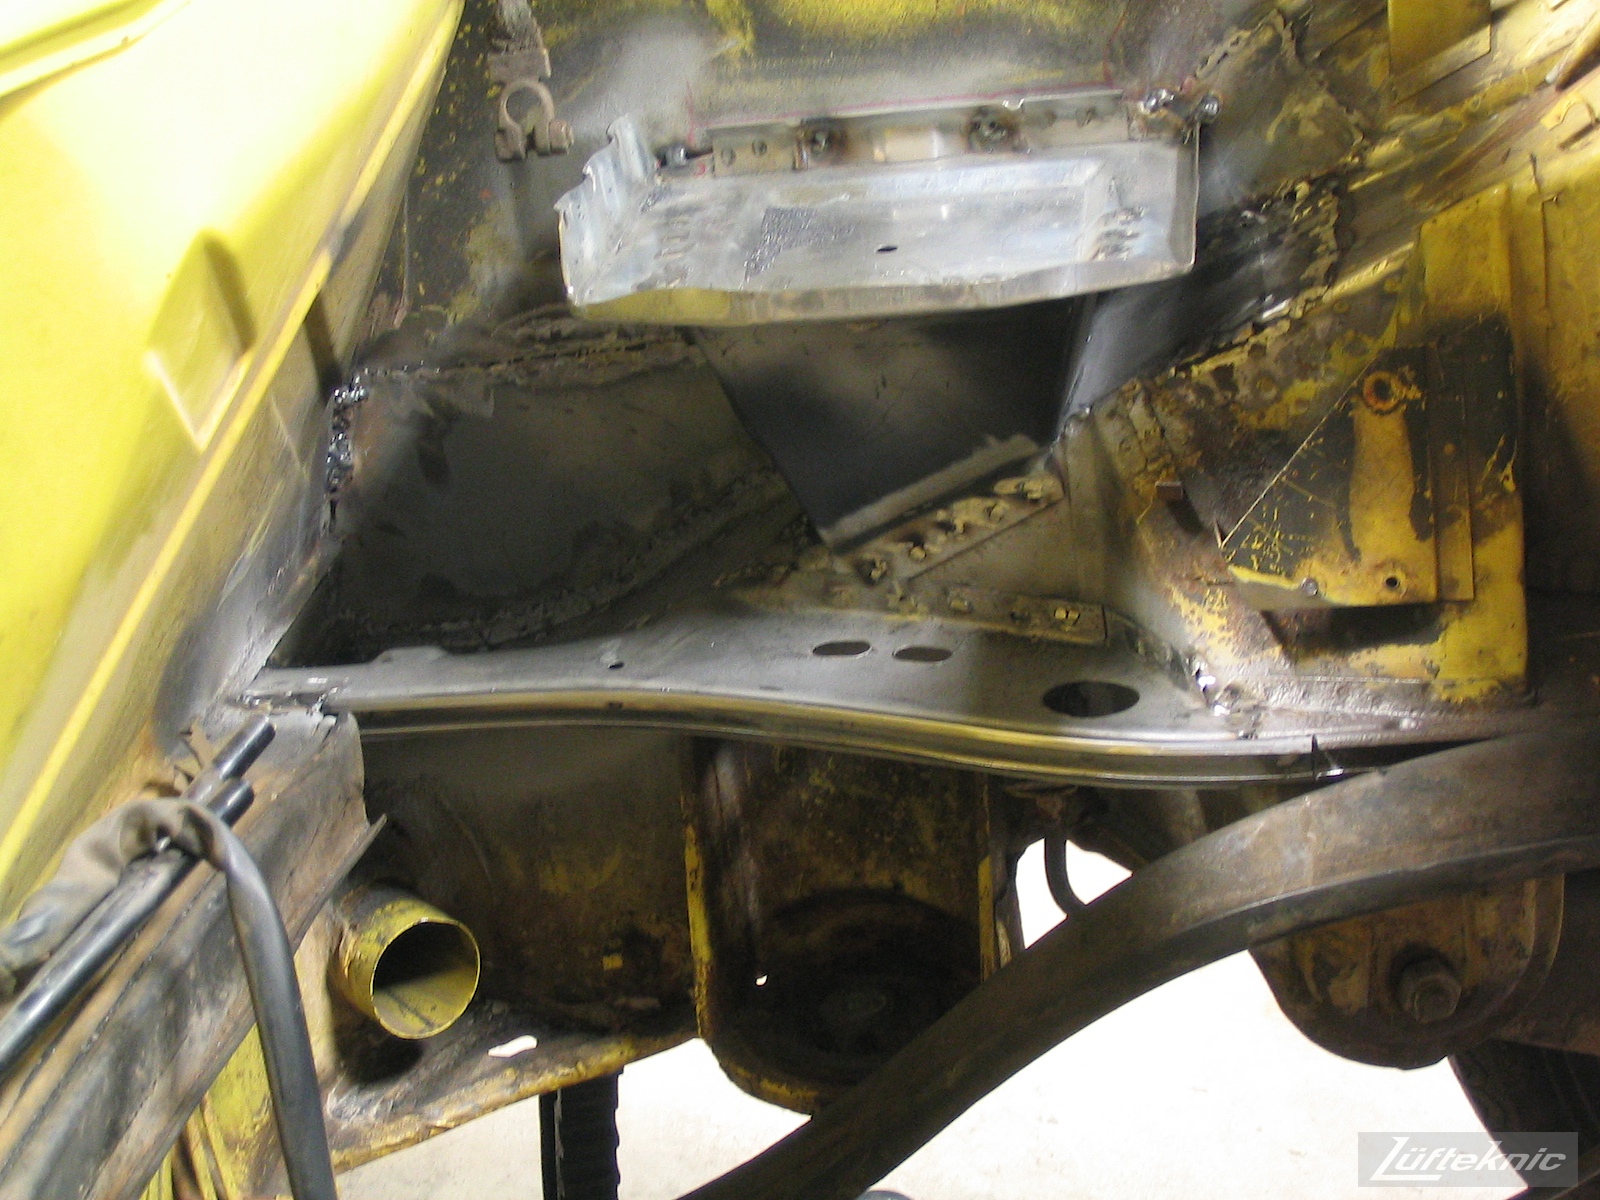 Repairing significant rust damage on the chassis of a yellow Porsche 914.